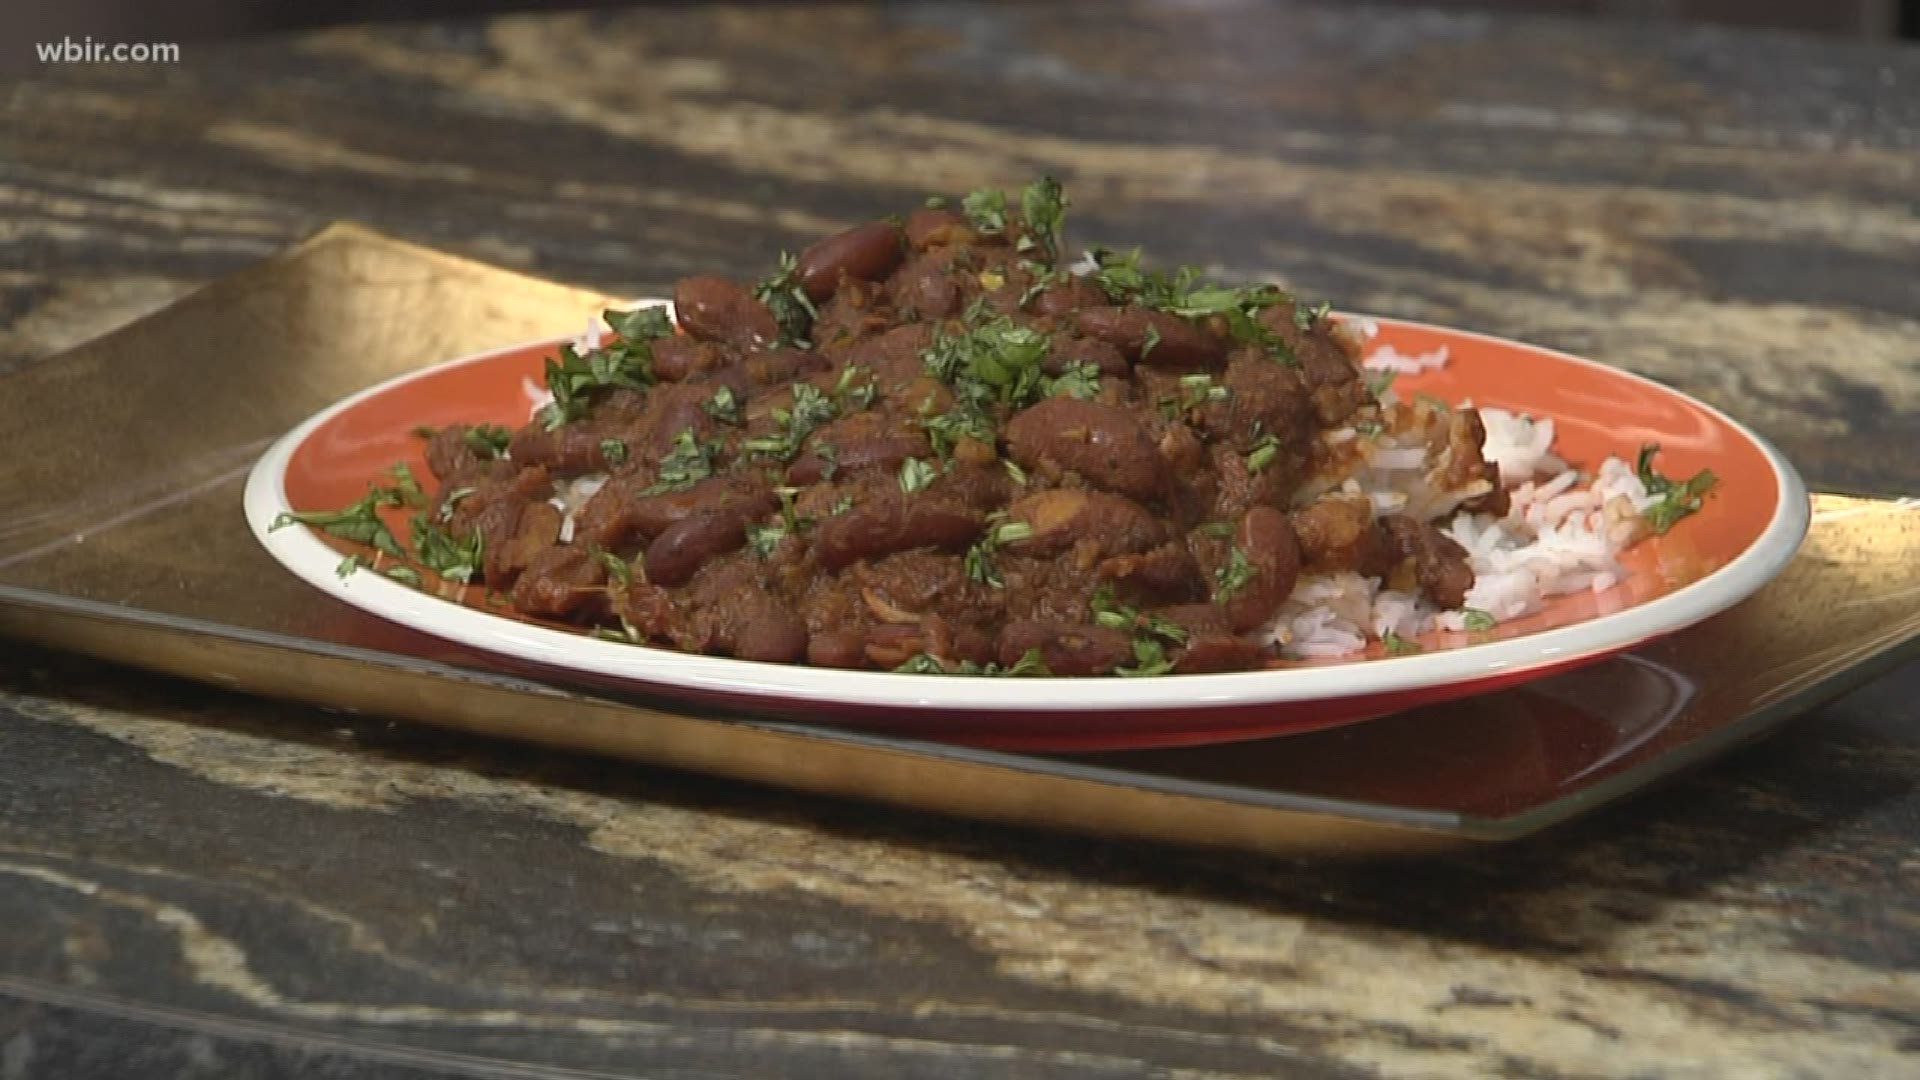 Hemal Tailor joins us in the kitchen to make an Indian-style chili, rajma masala.